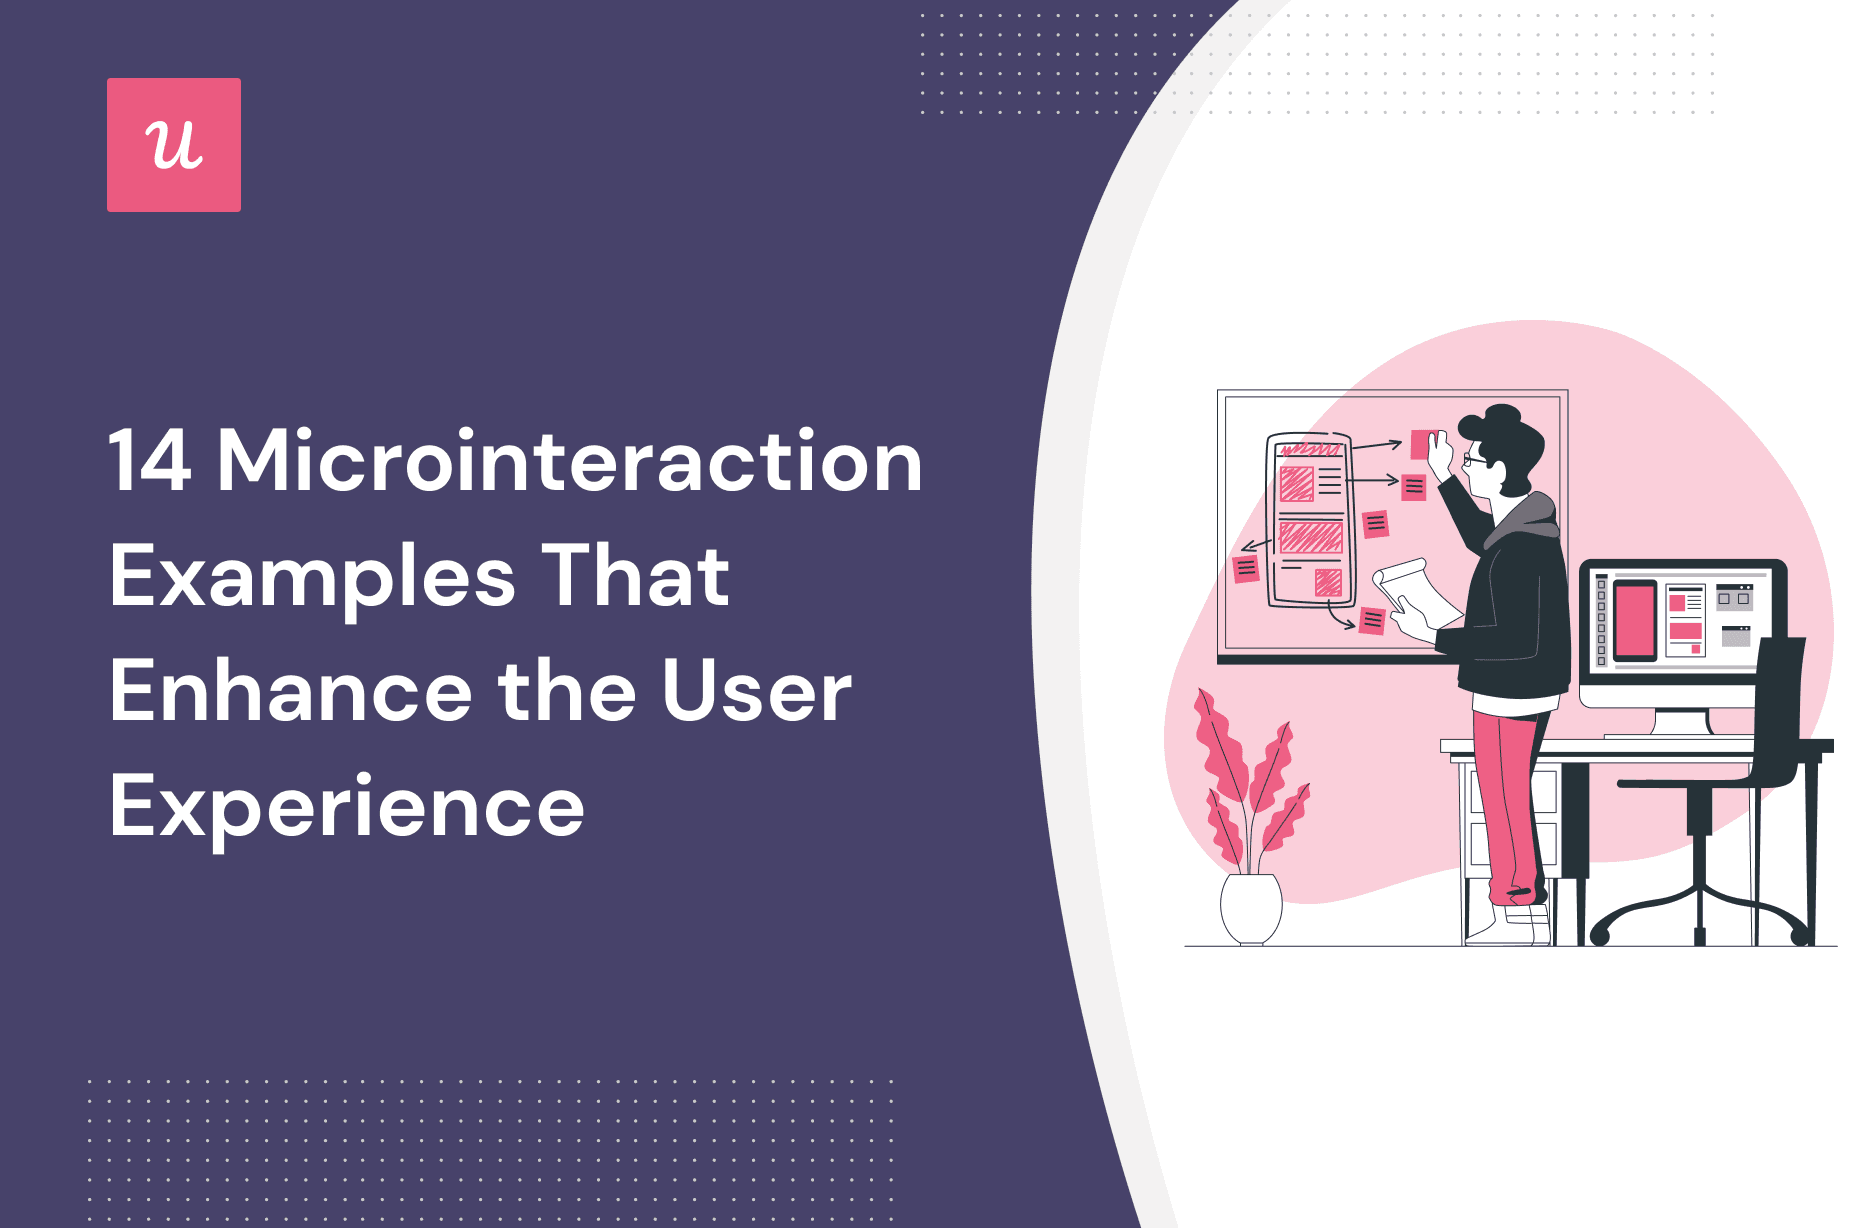 14 Microinteraction Examples That Enhance the User Experience cover